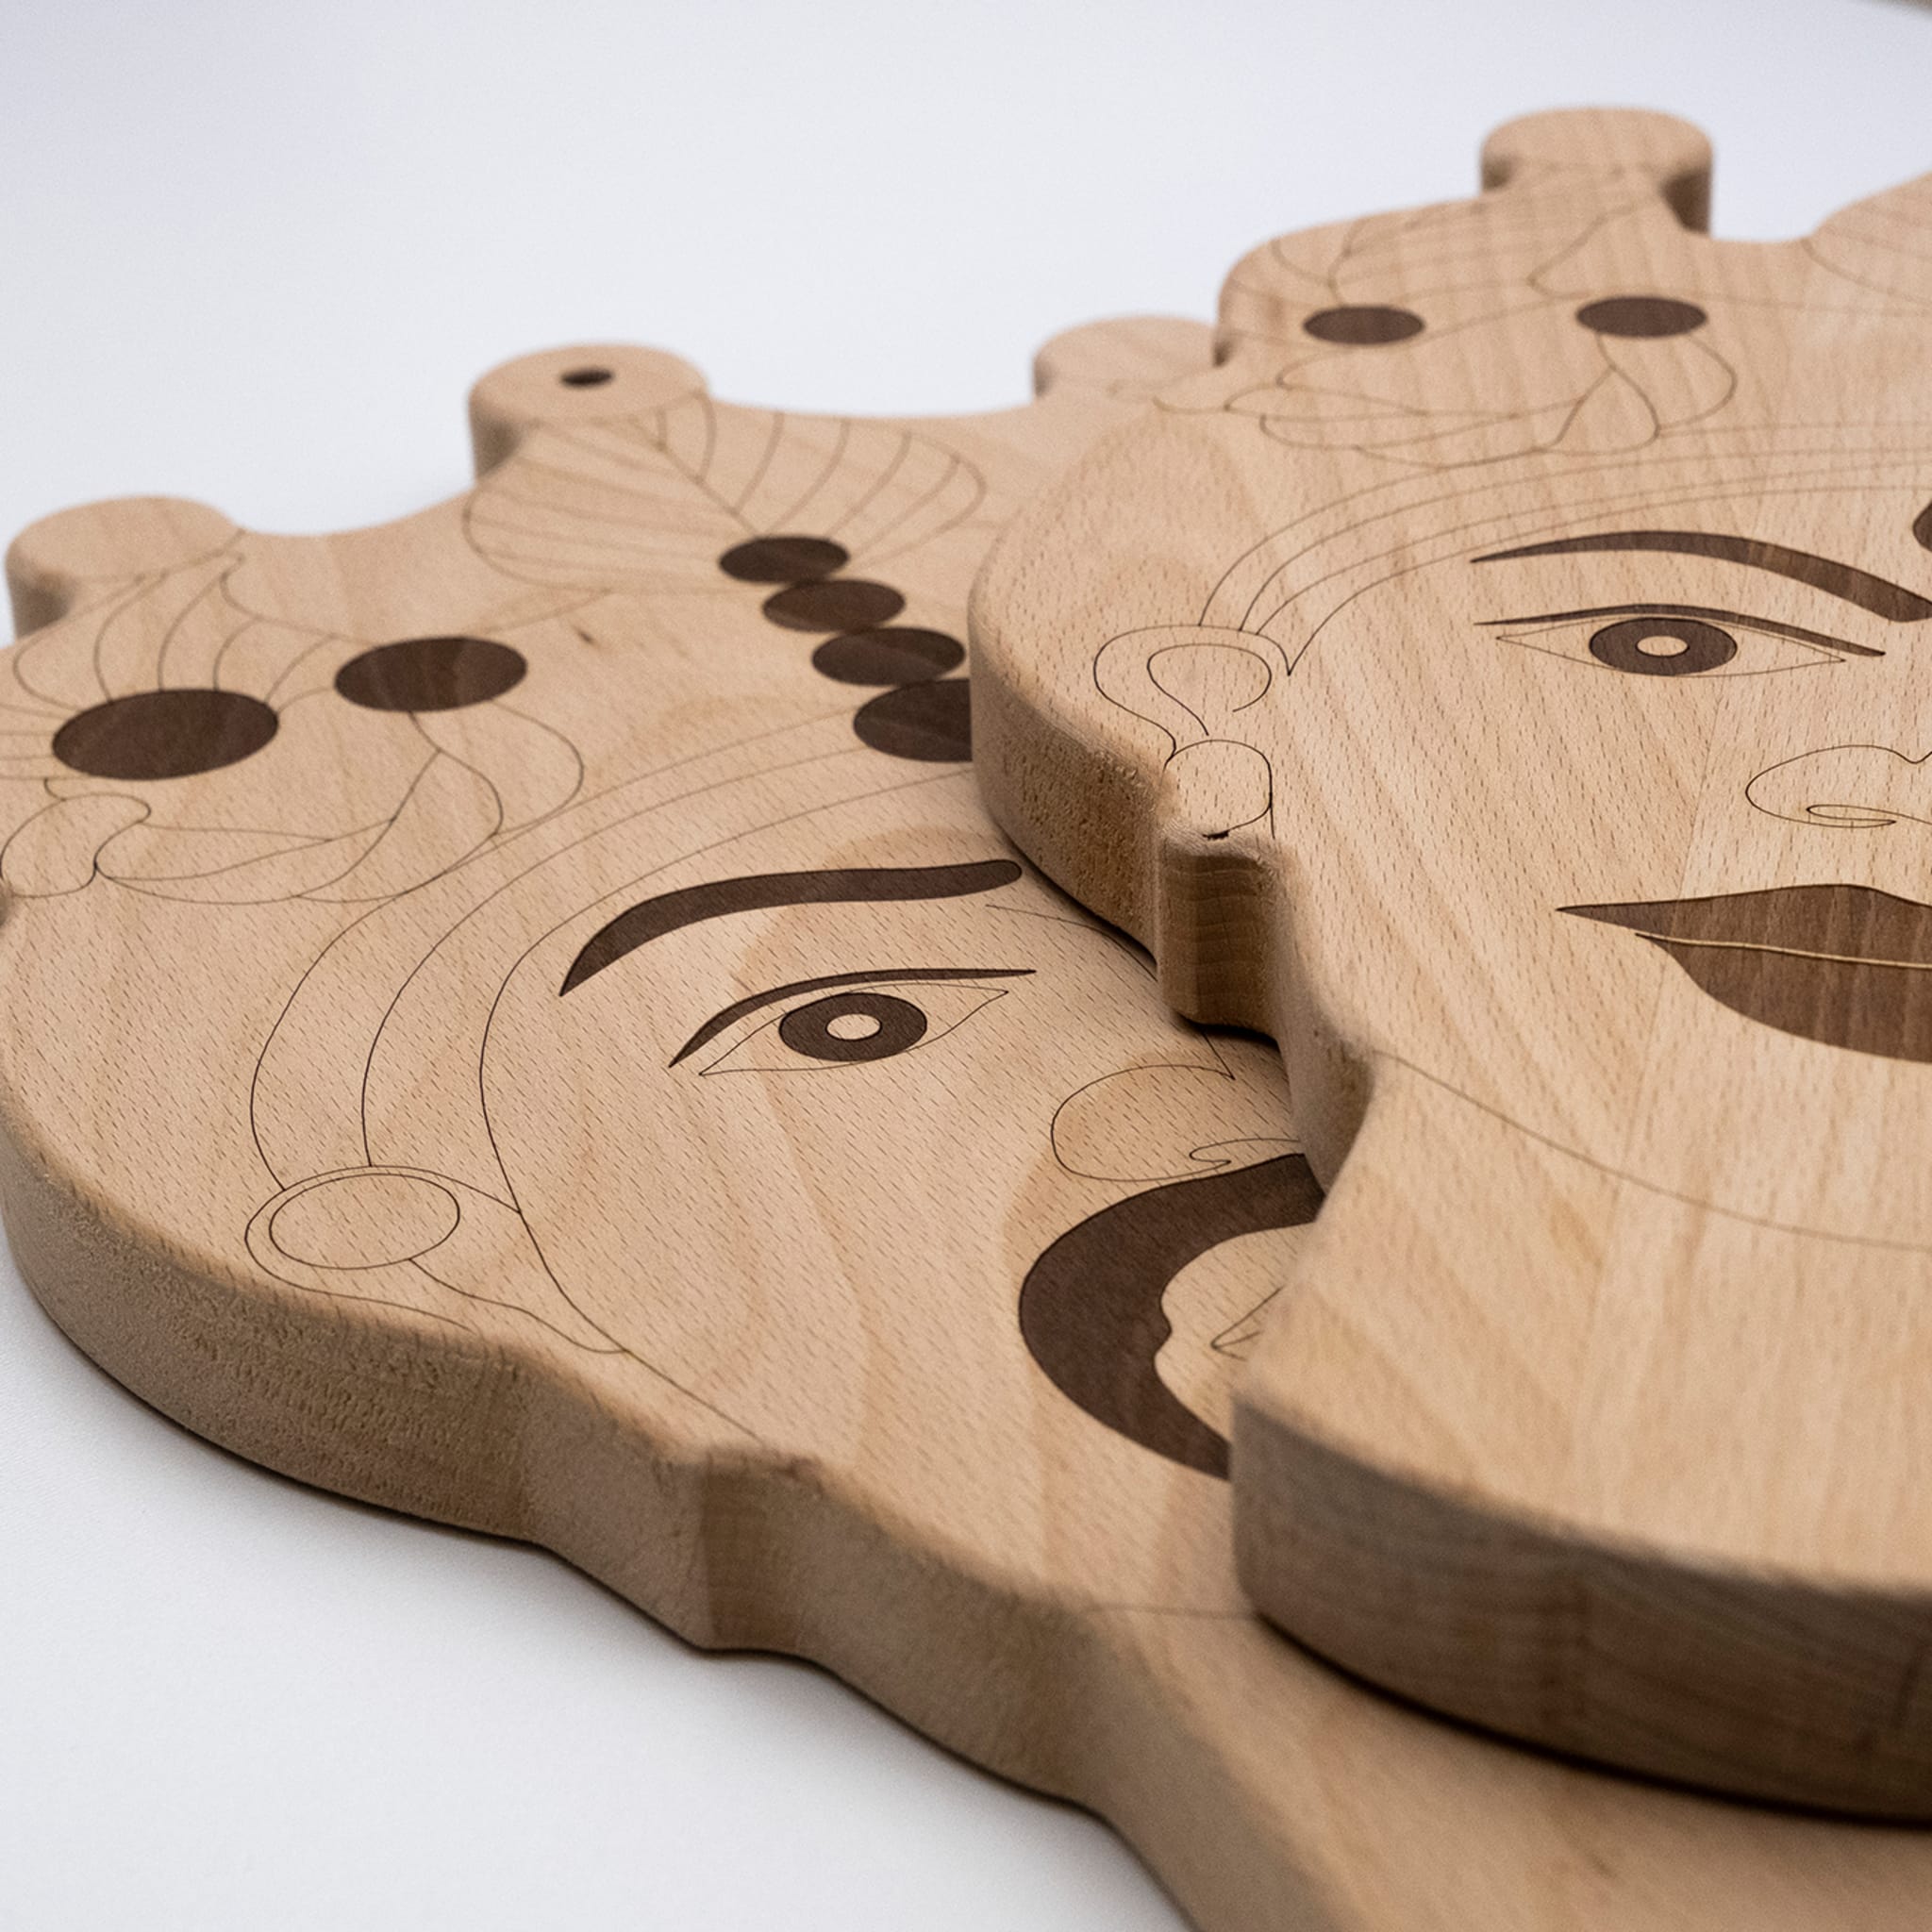 Teste di Moro Inlaid Set of 2 Cutting Boards by Gabriele E. M. D'Angelo - Alternative view 1